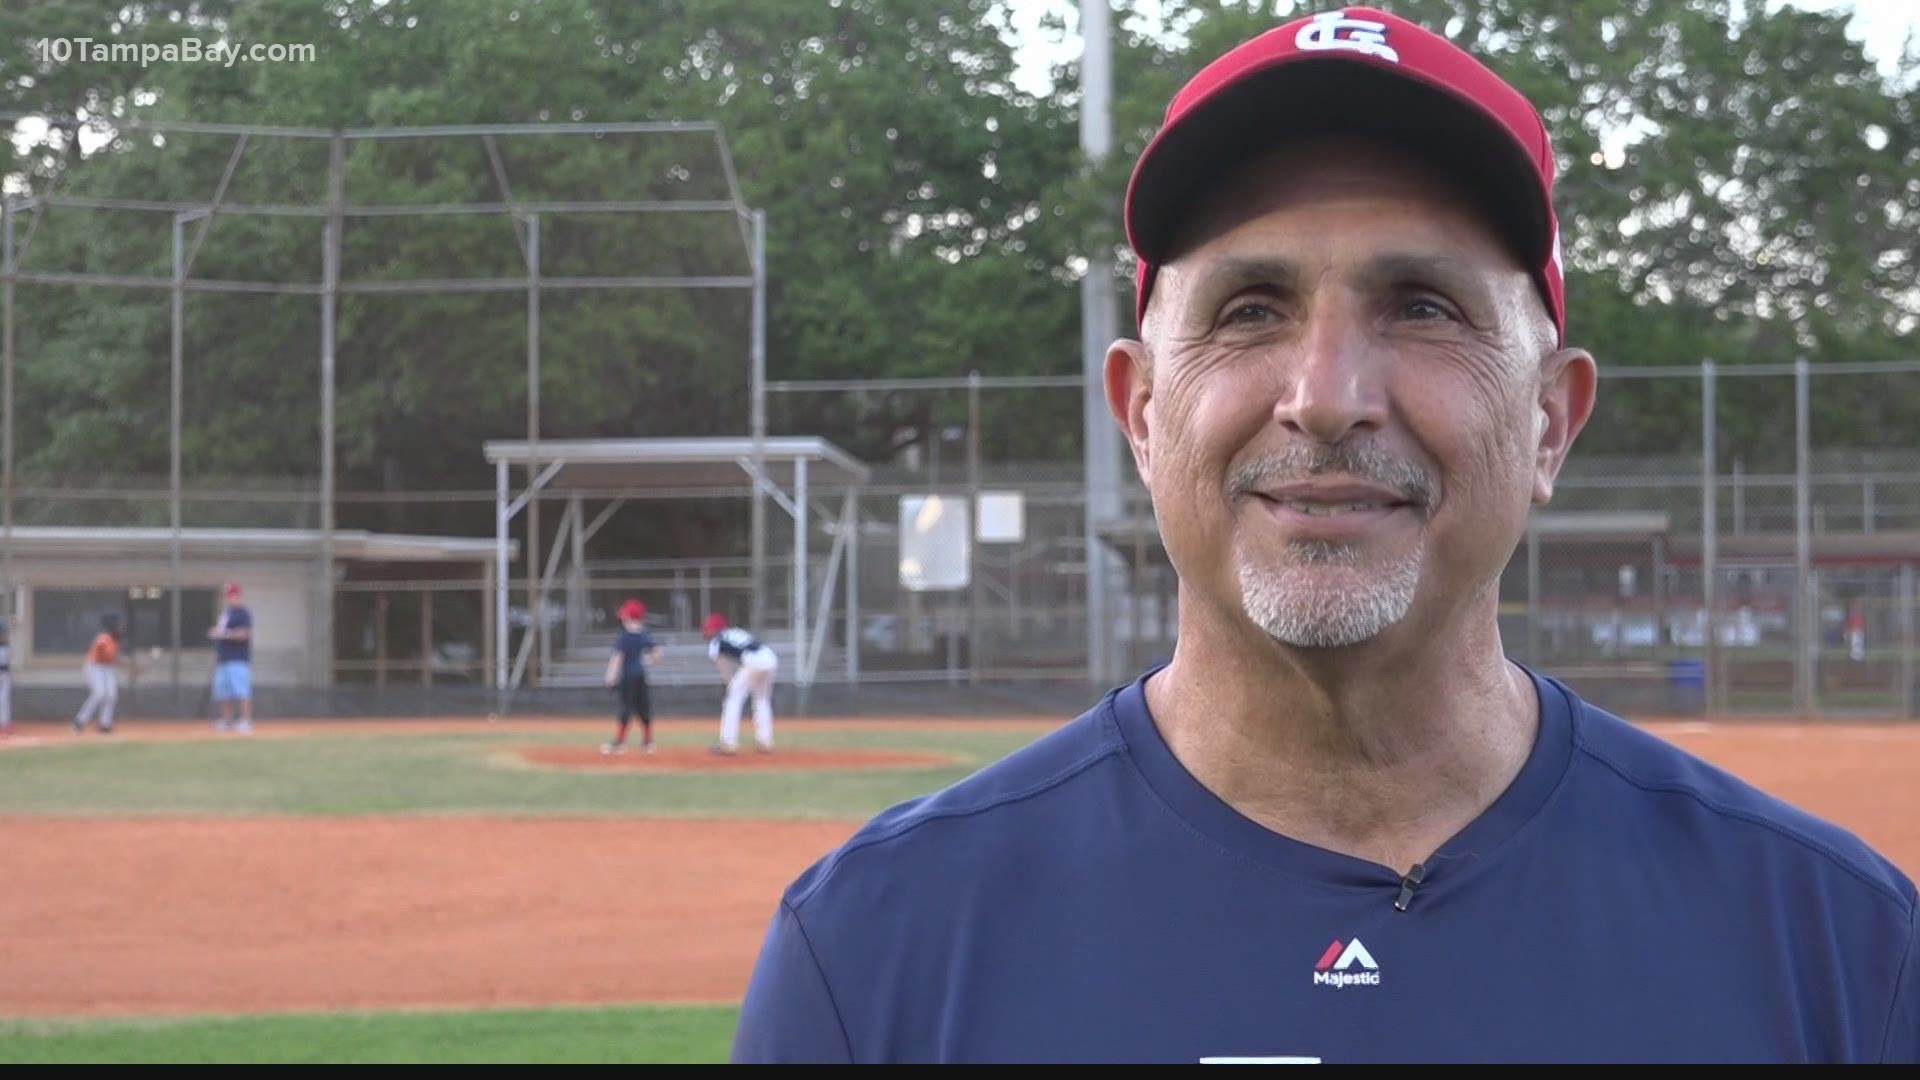 Vince Ionata began coaching at age 31. That was 31 years ago. Players love the Dunedin Little League coach, who has helped teach multiple generations the sport.